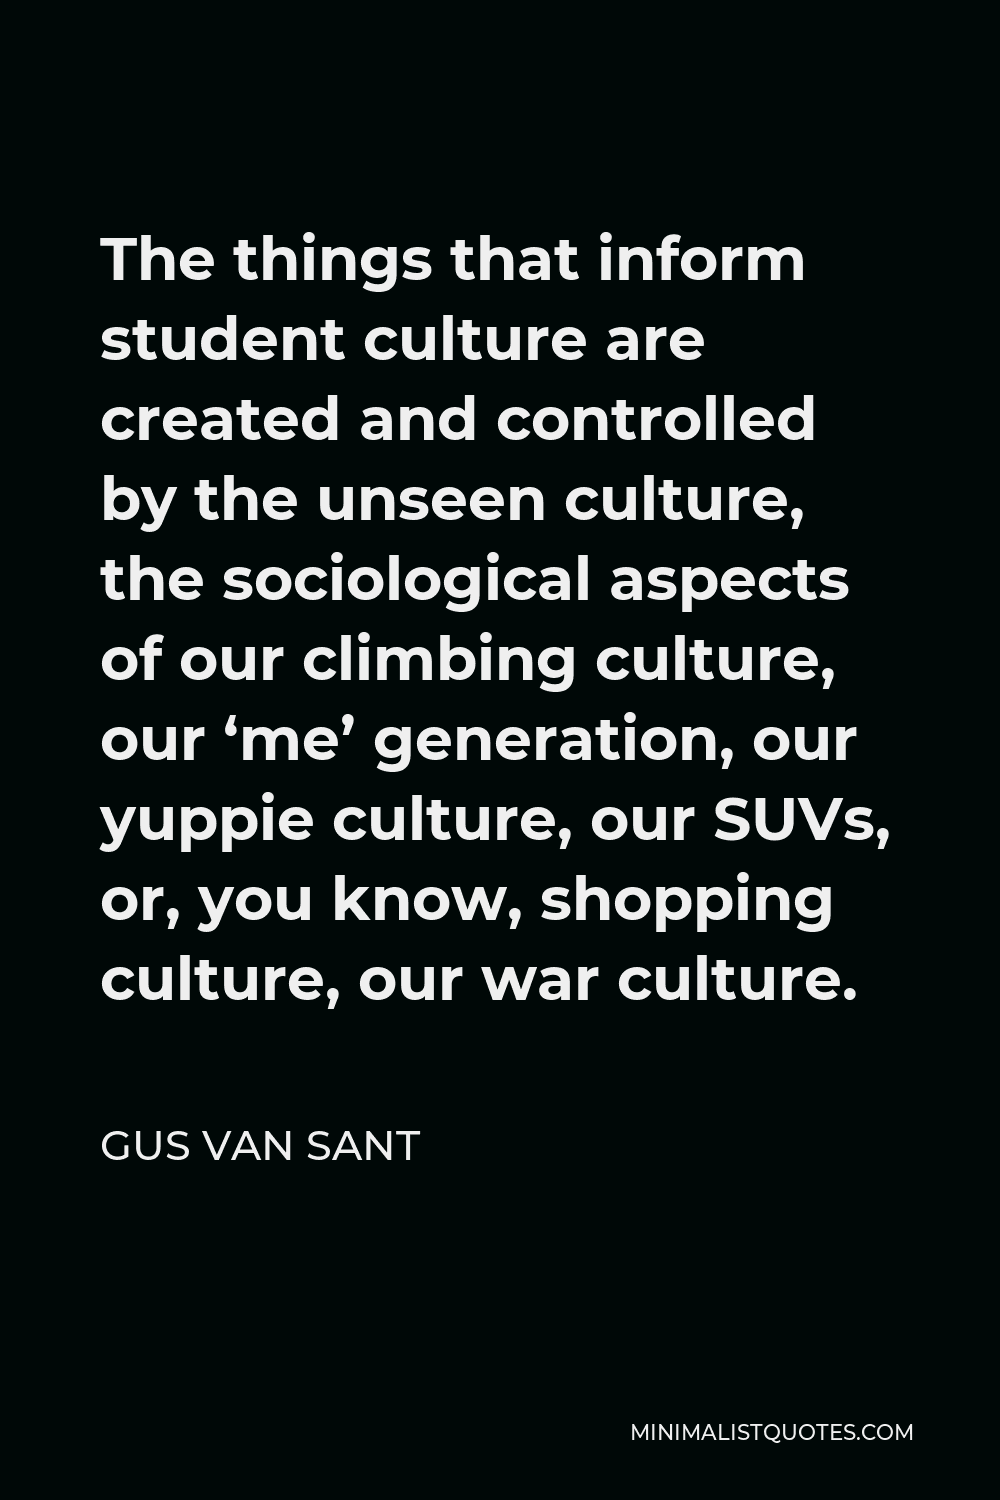 Gus Van Sant Quote - The things that inform student culture are created and controlled by the unseen culture, the sociological aspects of our climbing culture, our ‘me’ generation, our yuppie culture, our SUVs, or, you know, shopping culture, our war culture.